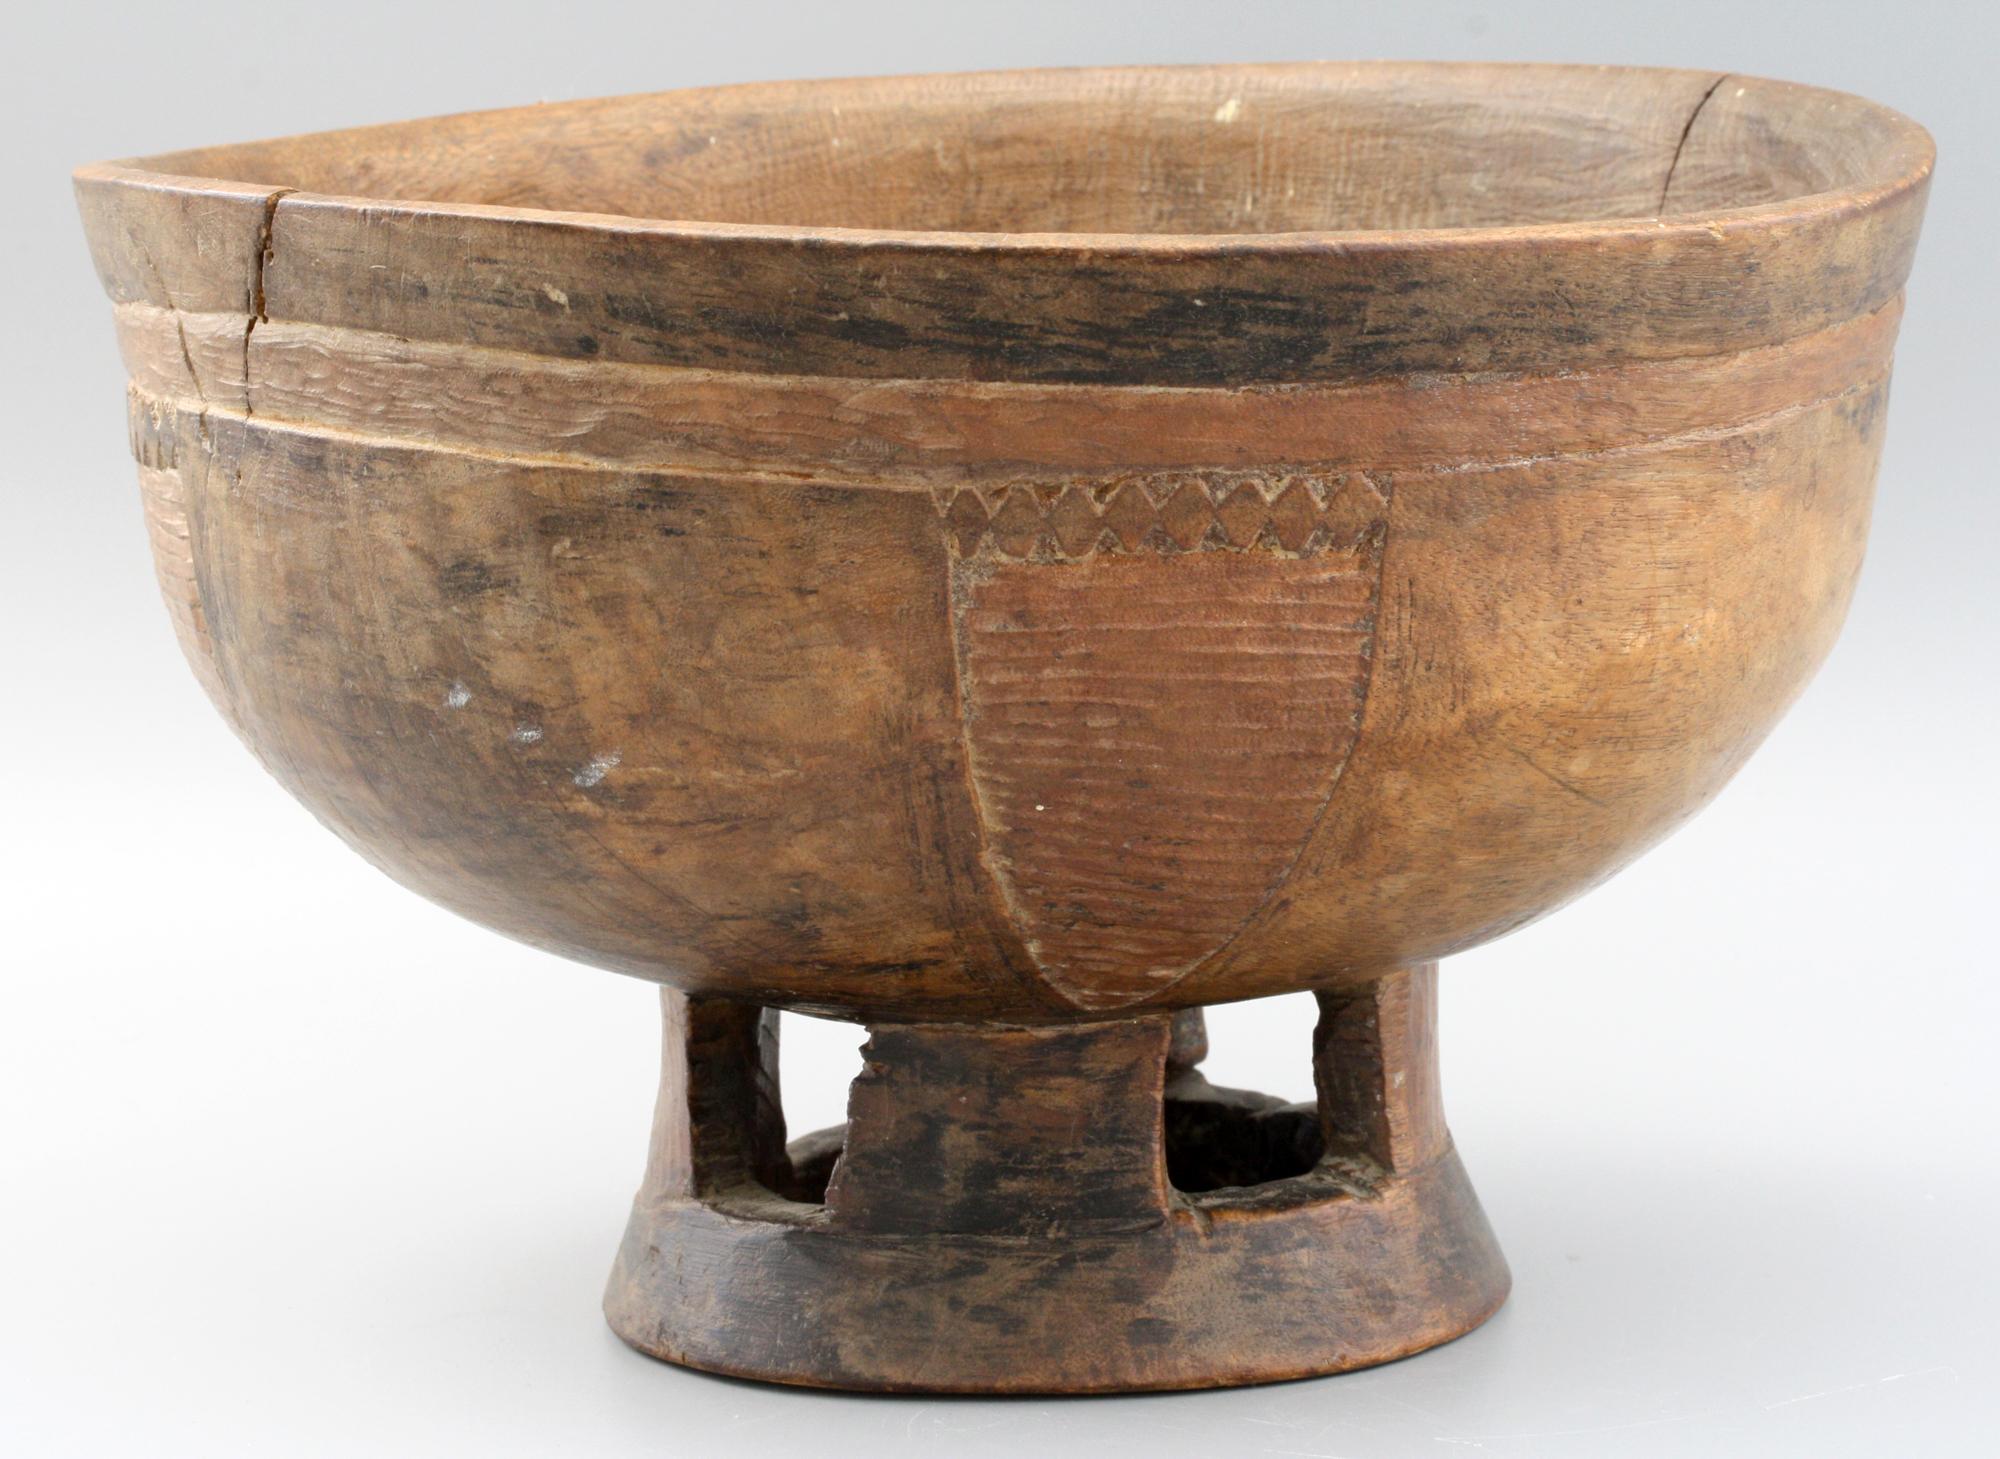 African Tribal Well Carved Wooden Pedestal Bowl or Mortar 4